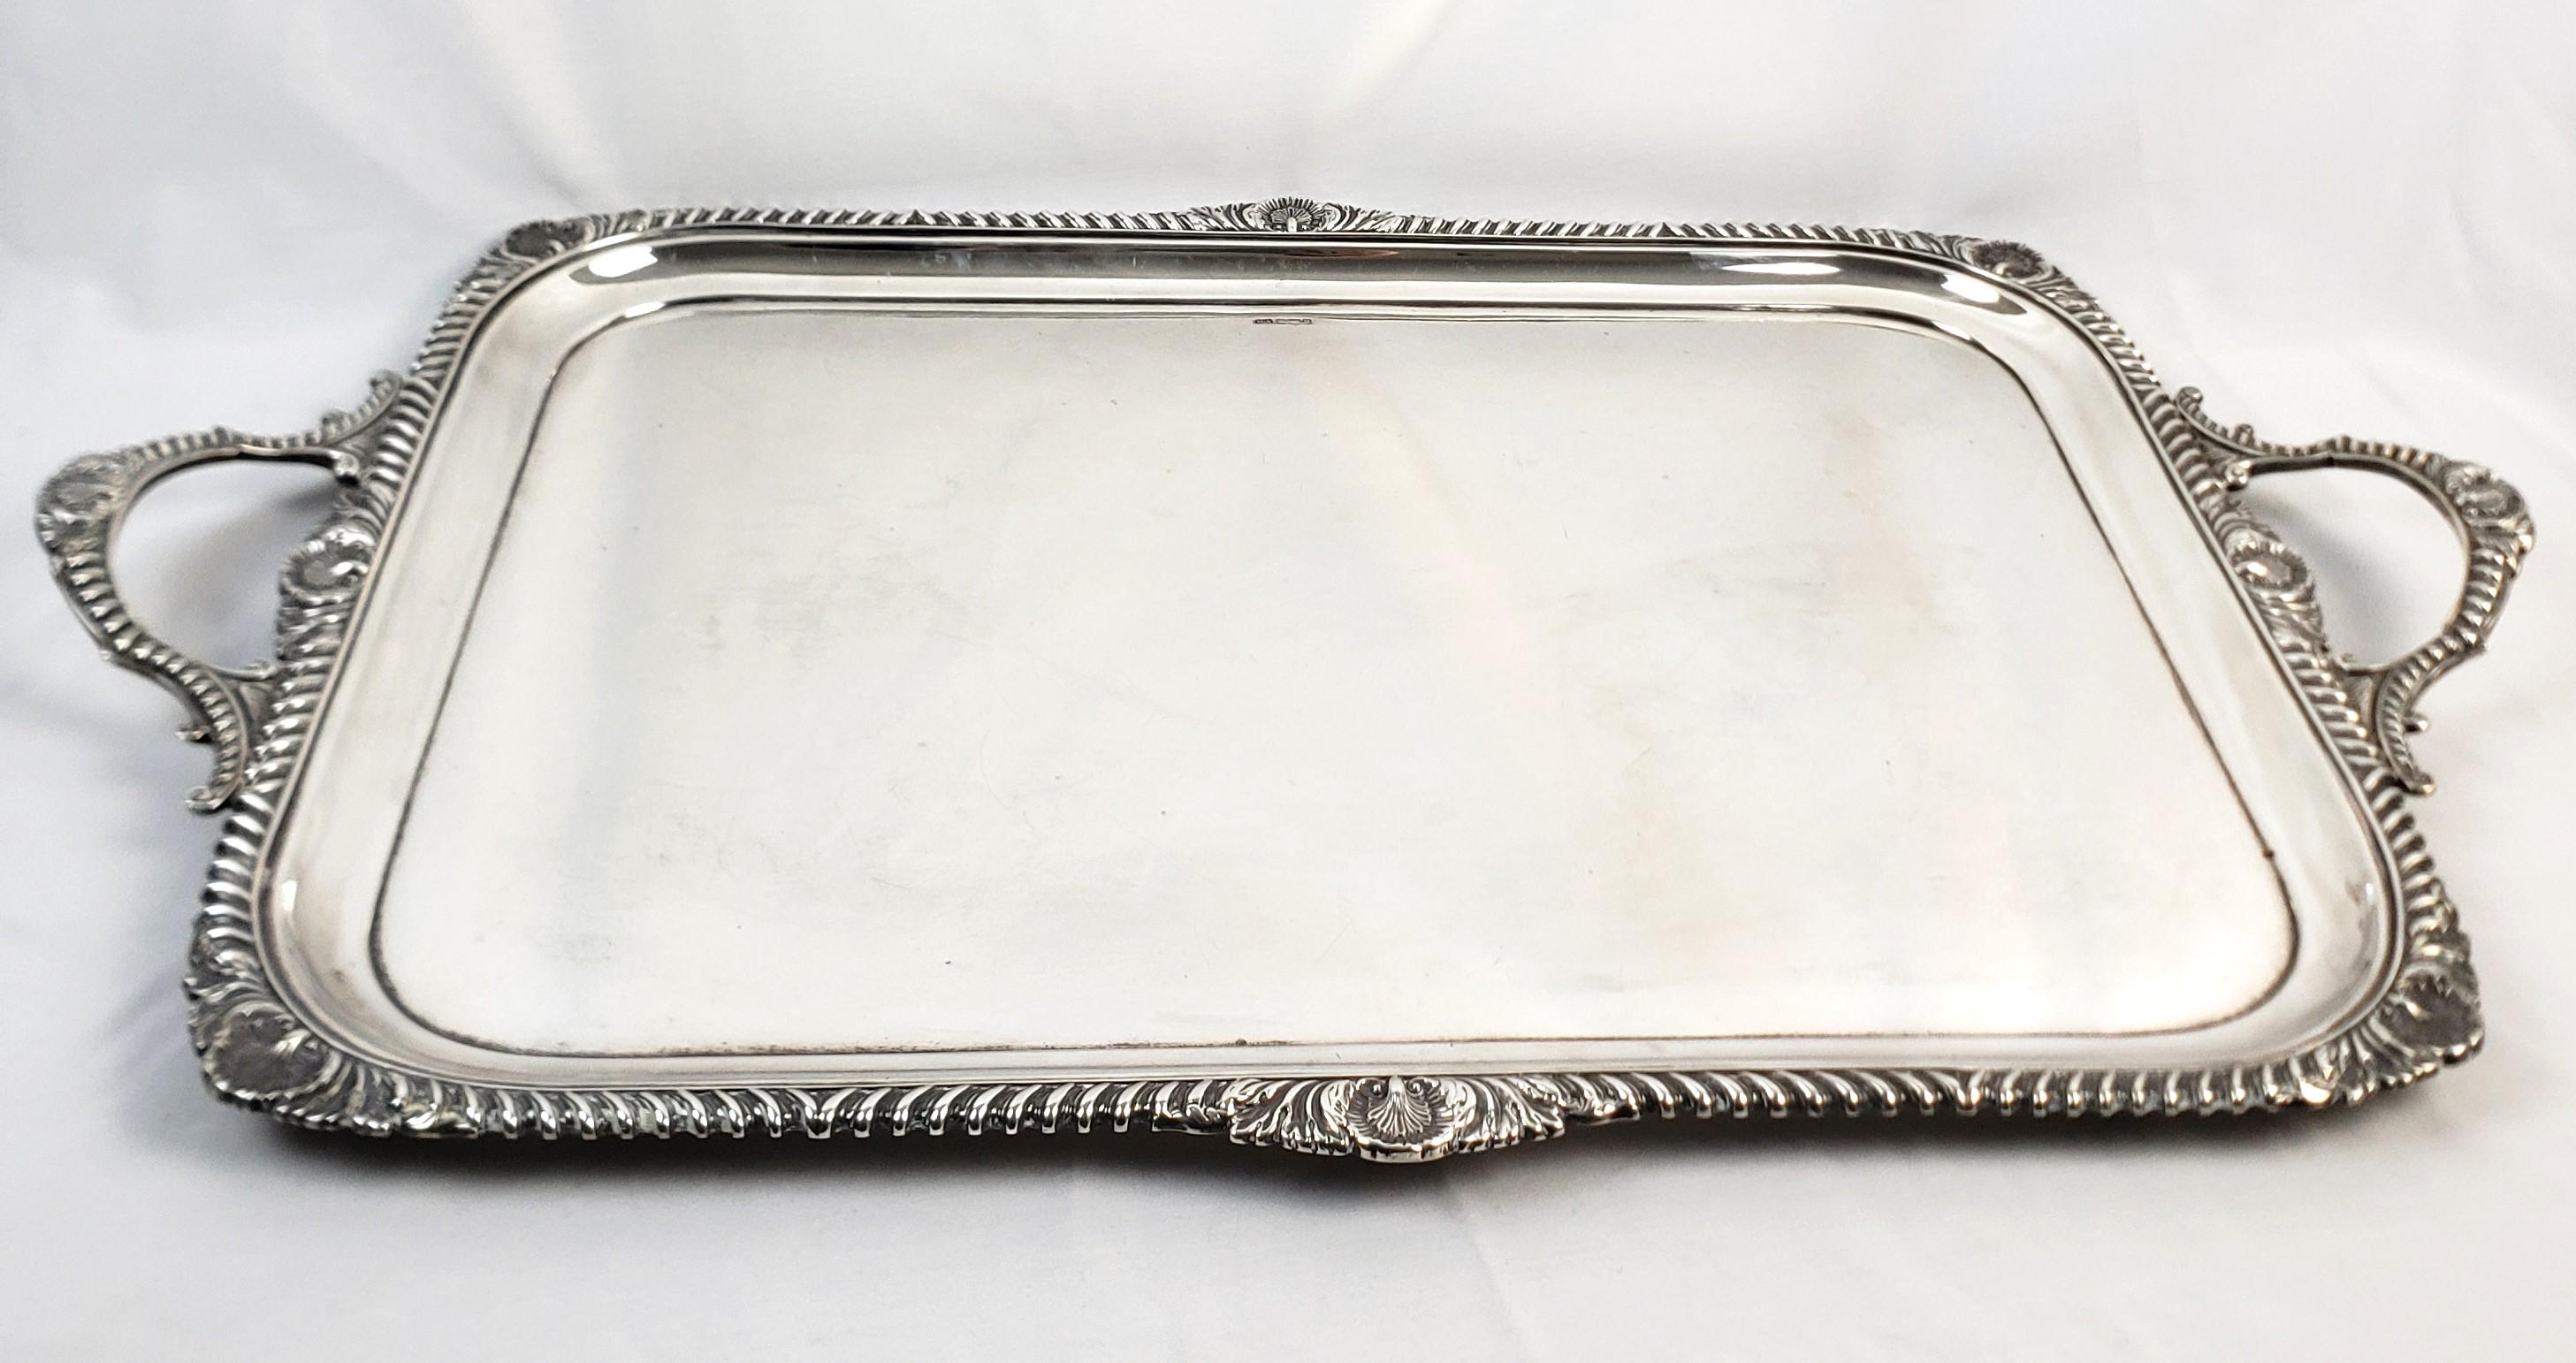 This very large and substantial antique serving tray was made by the Atkins Bros. silversmiths of England and dates to approximately 1900 and done in the period Edwardian style. The tray is composed of sterling silver and weighs in excess of four